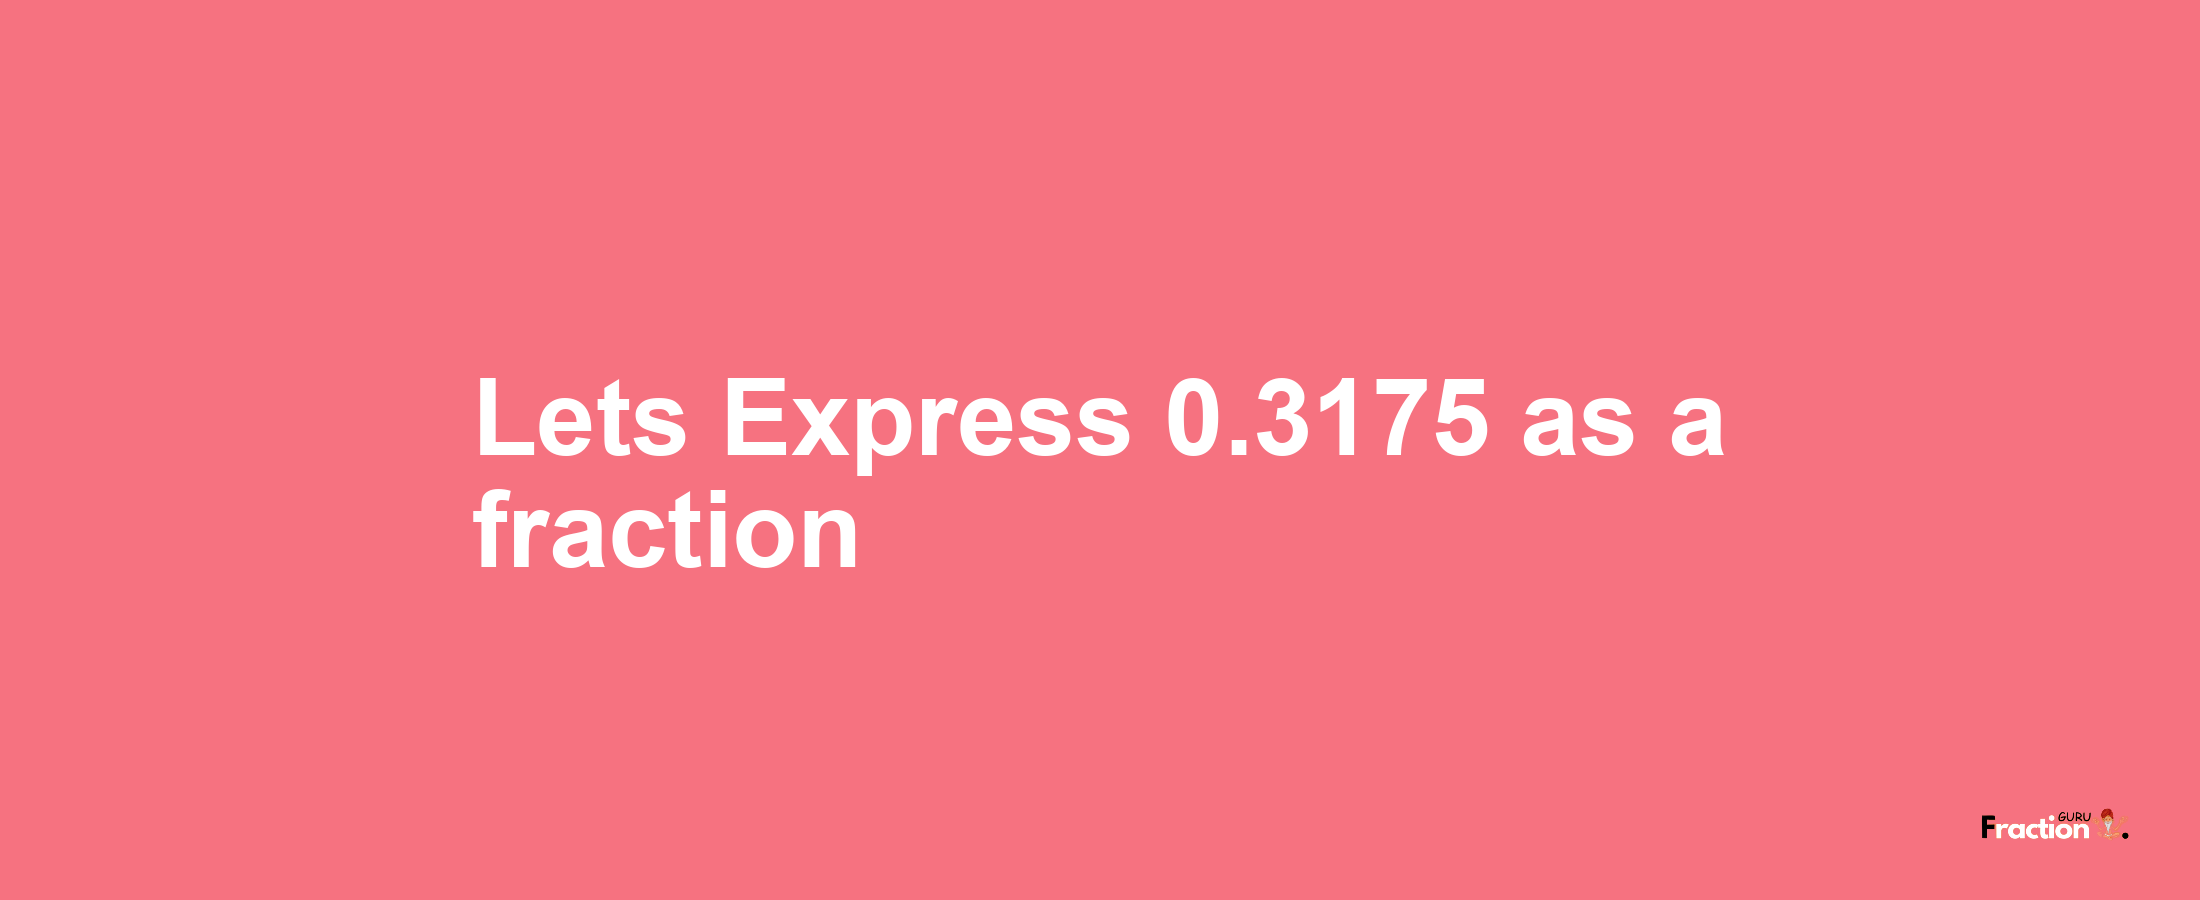 Lets Express 0.3175 as afraction